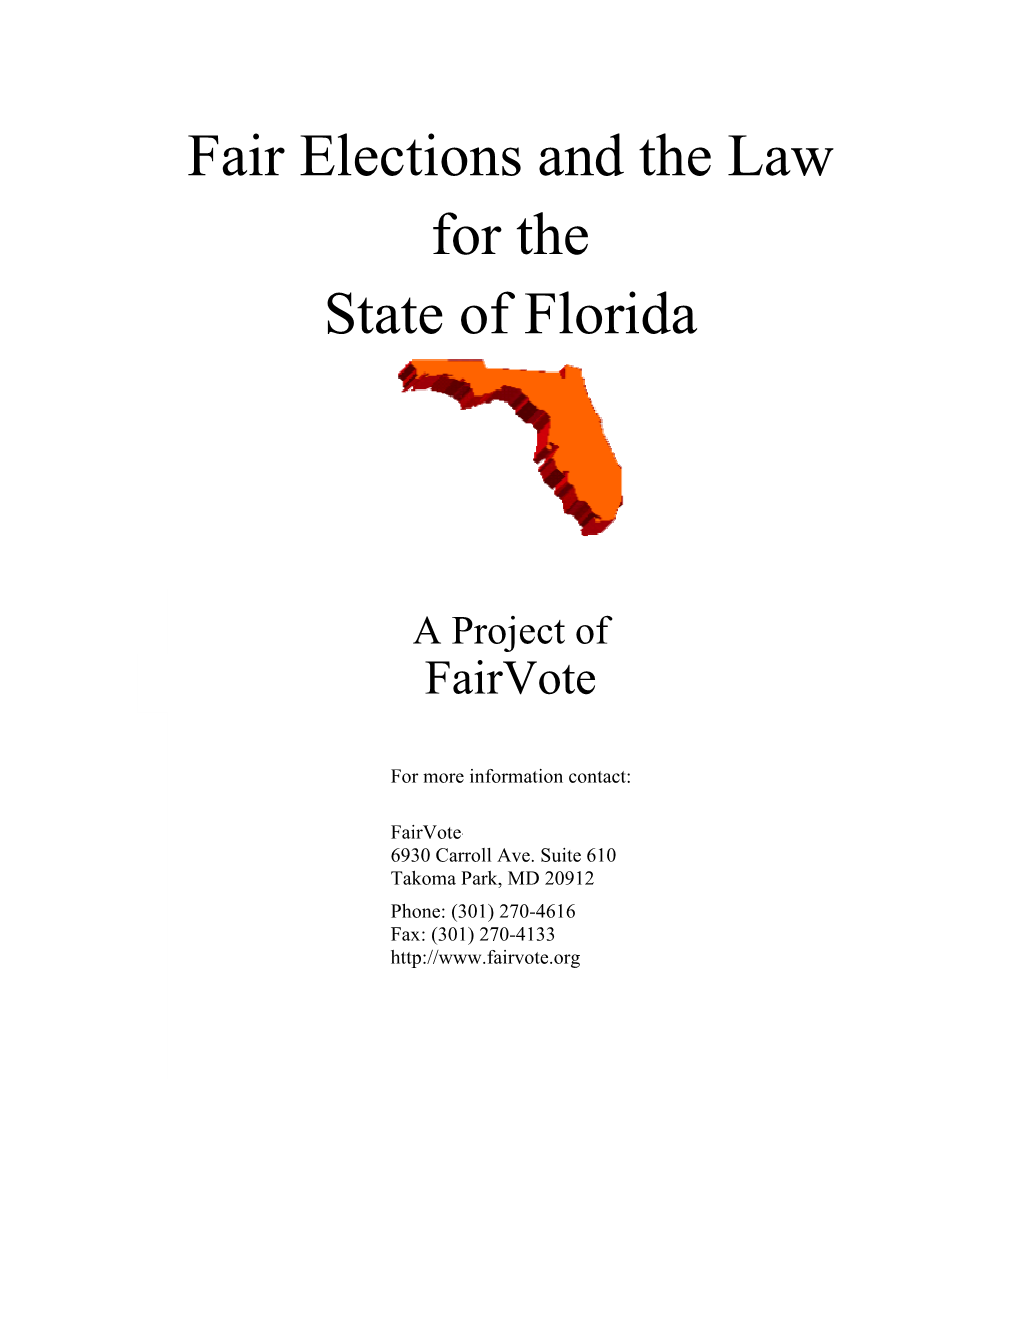 Fair Elections and the Law for the State of Florida